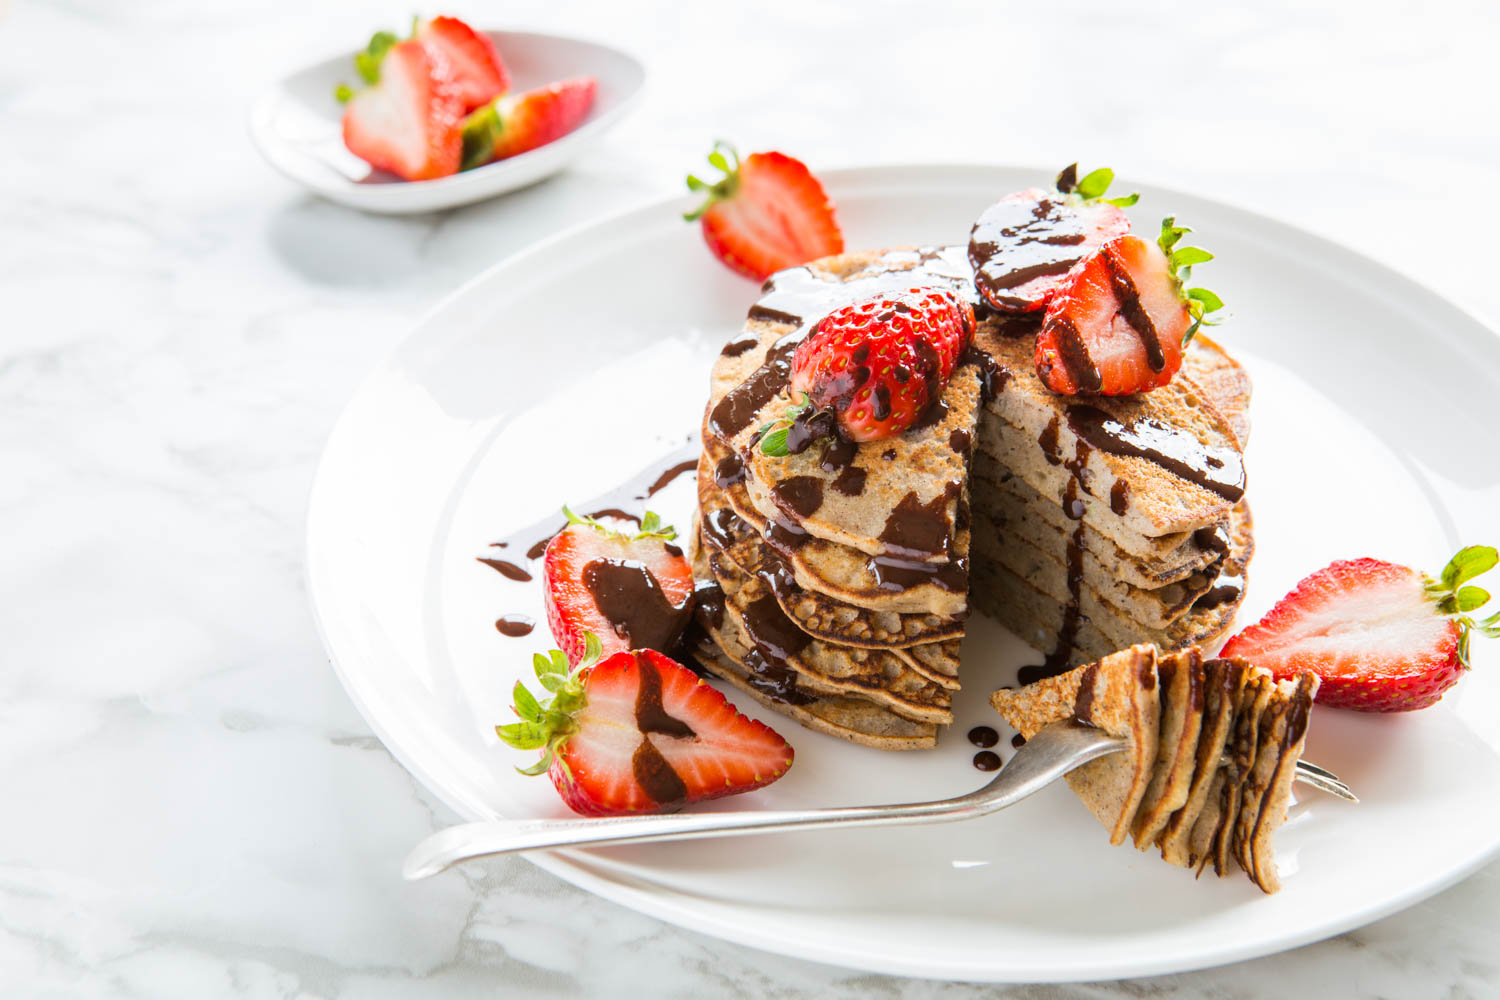 Easy-Flip Buckwheat Pancakes with Chocolate Drizzle